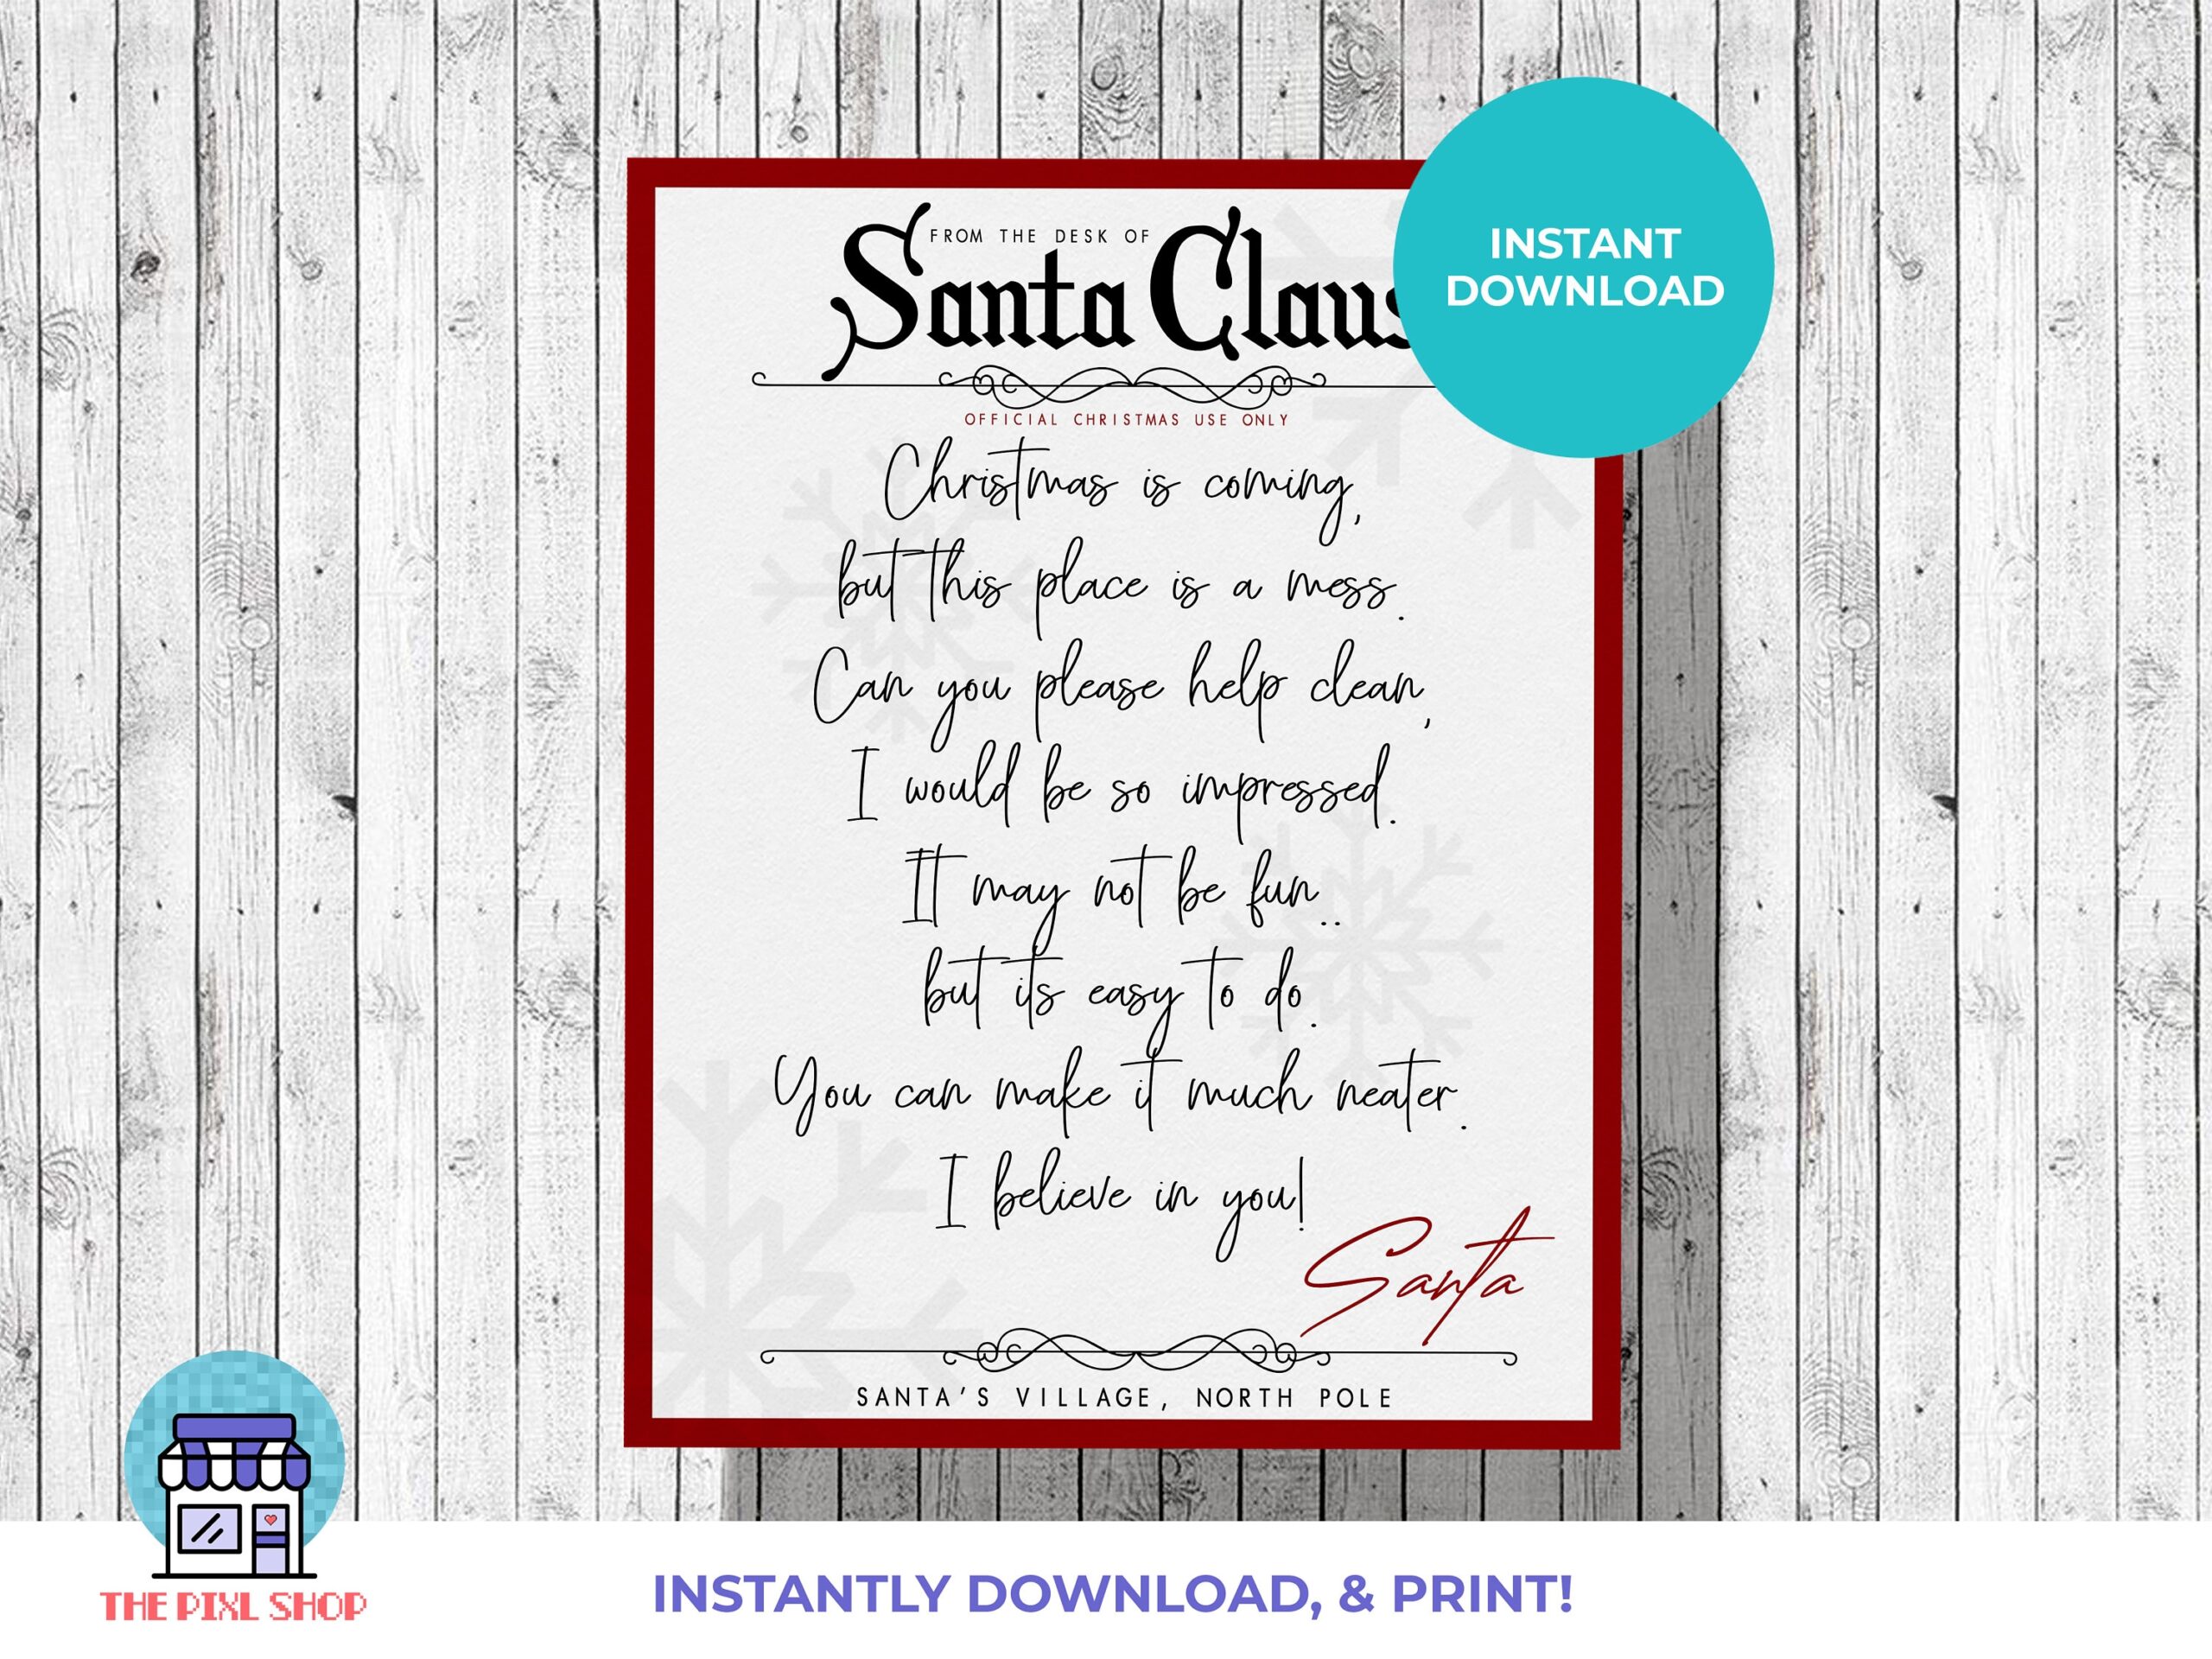 Messy Room Letter From Santa Clean Your Room Printable Etsy